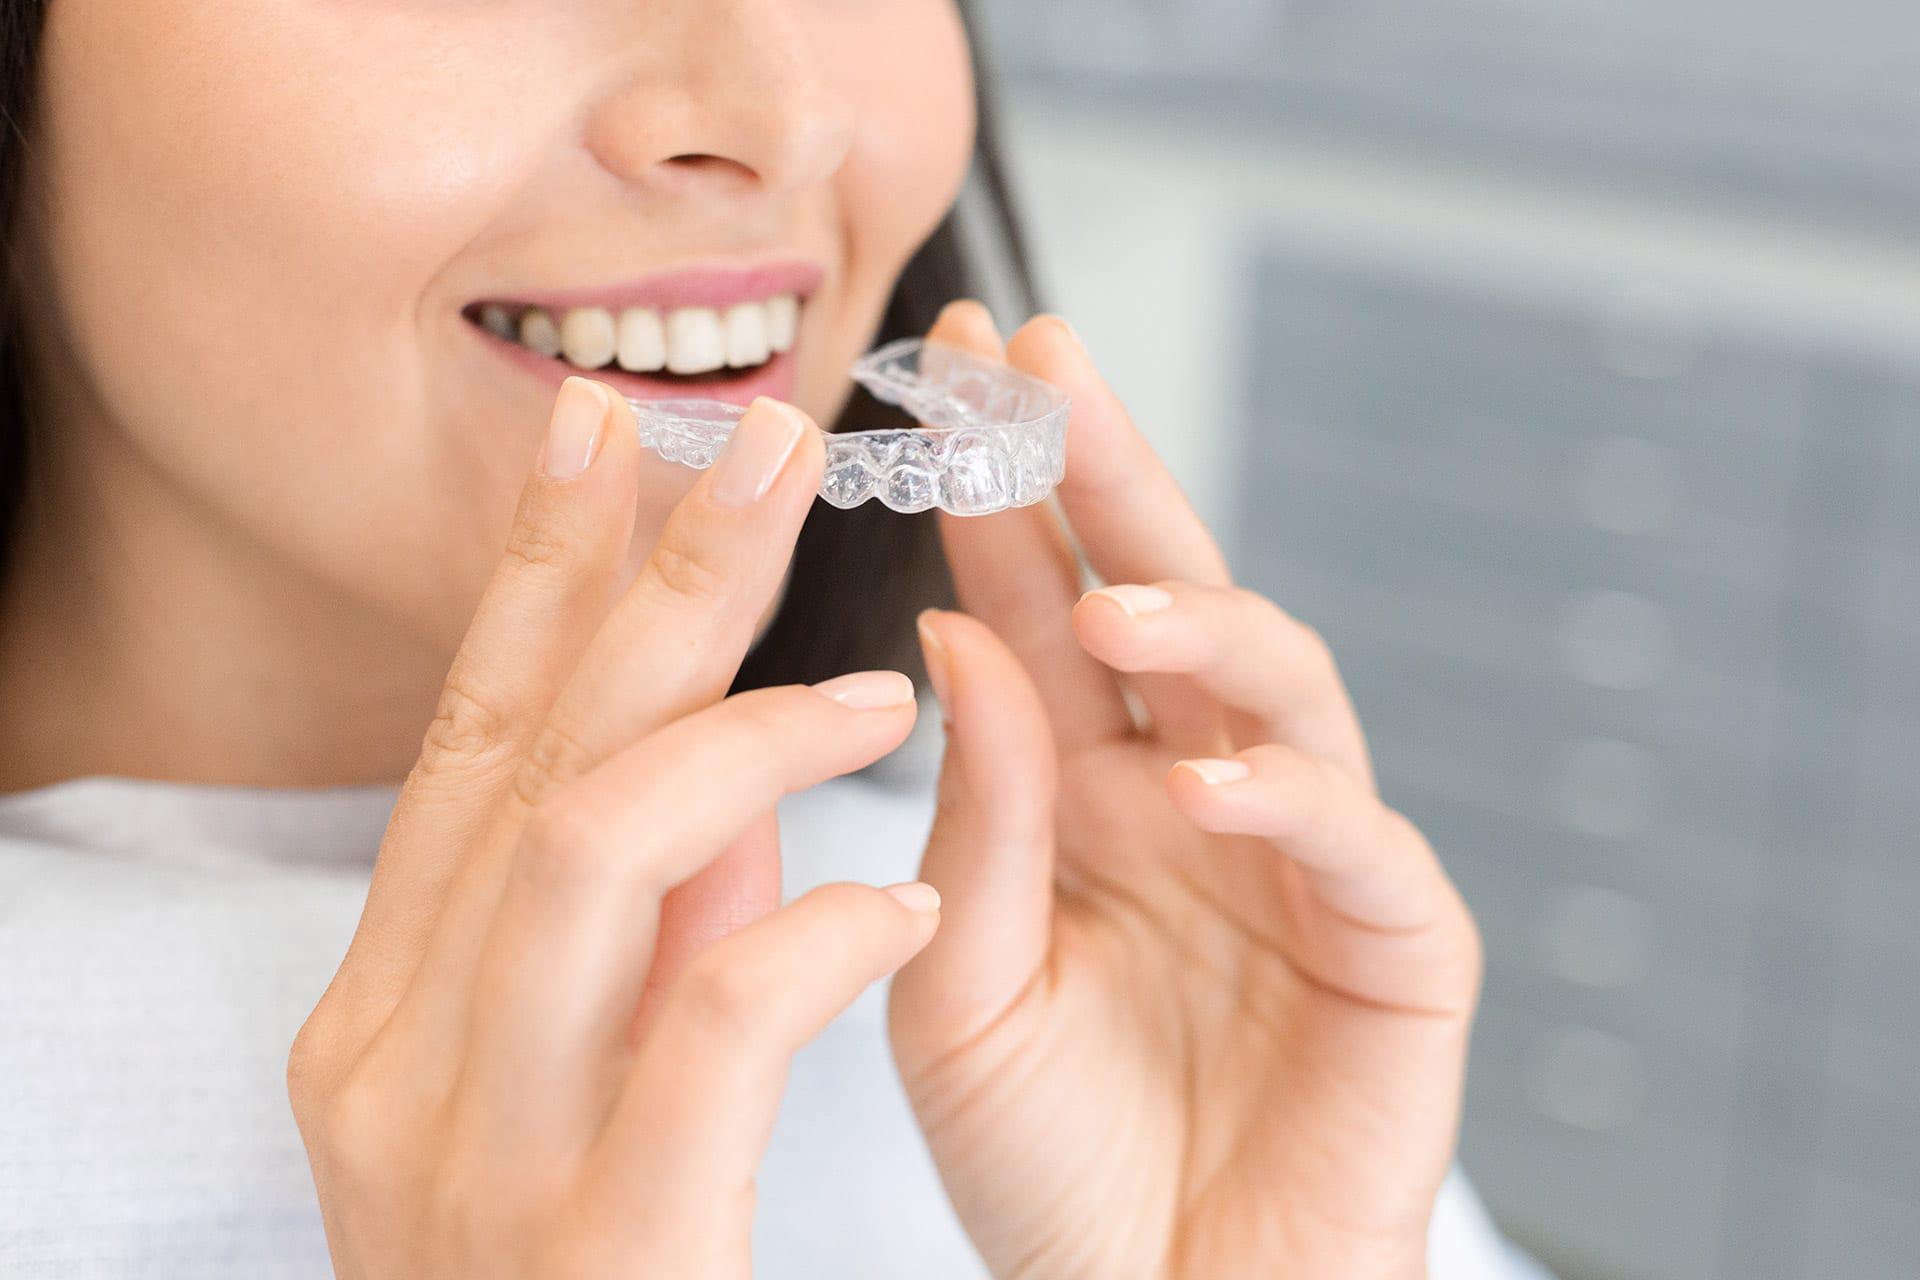 Woman in inserts an Invisalign clear orthodontic aligner from best dentist Orangevale, CA